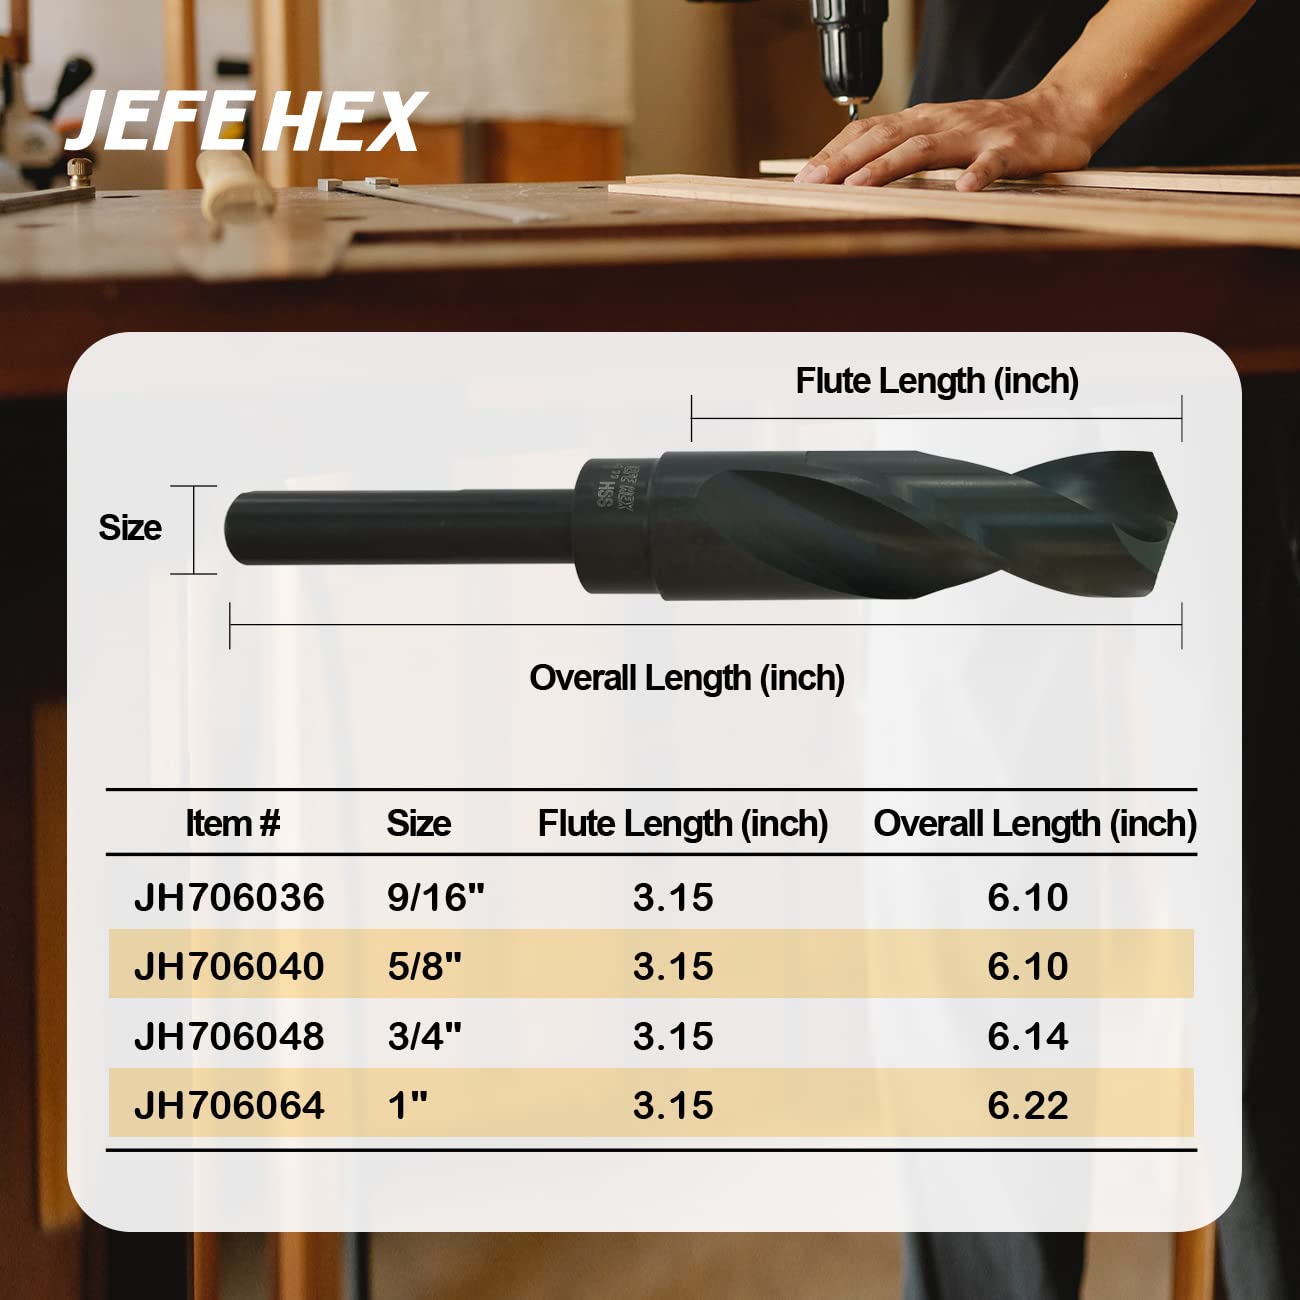 JEFE HEX 1 Inch 3PCS Black Oxide Reduced Shank Industrial Drill Bits with 135 Degree Split Point and 1/2" Shank